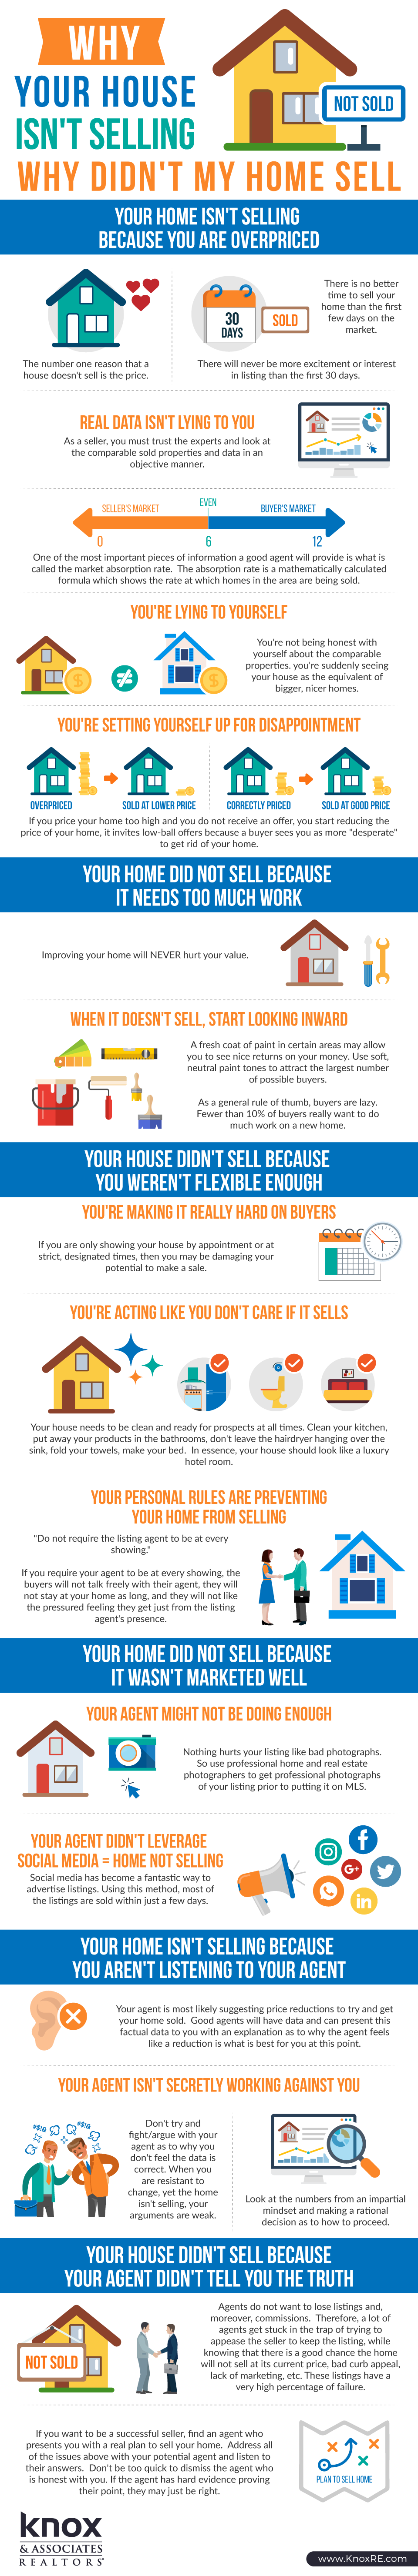 what do i need to know about selling my house